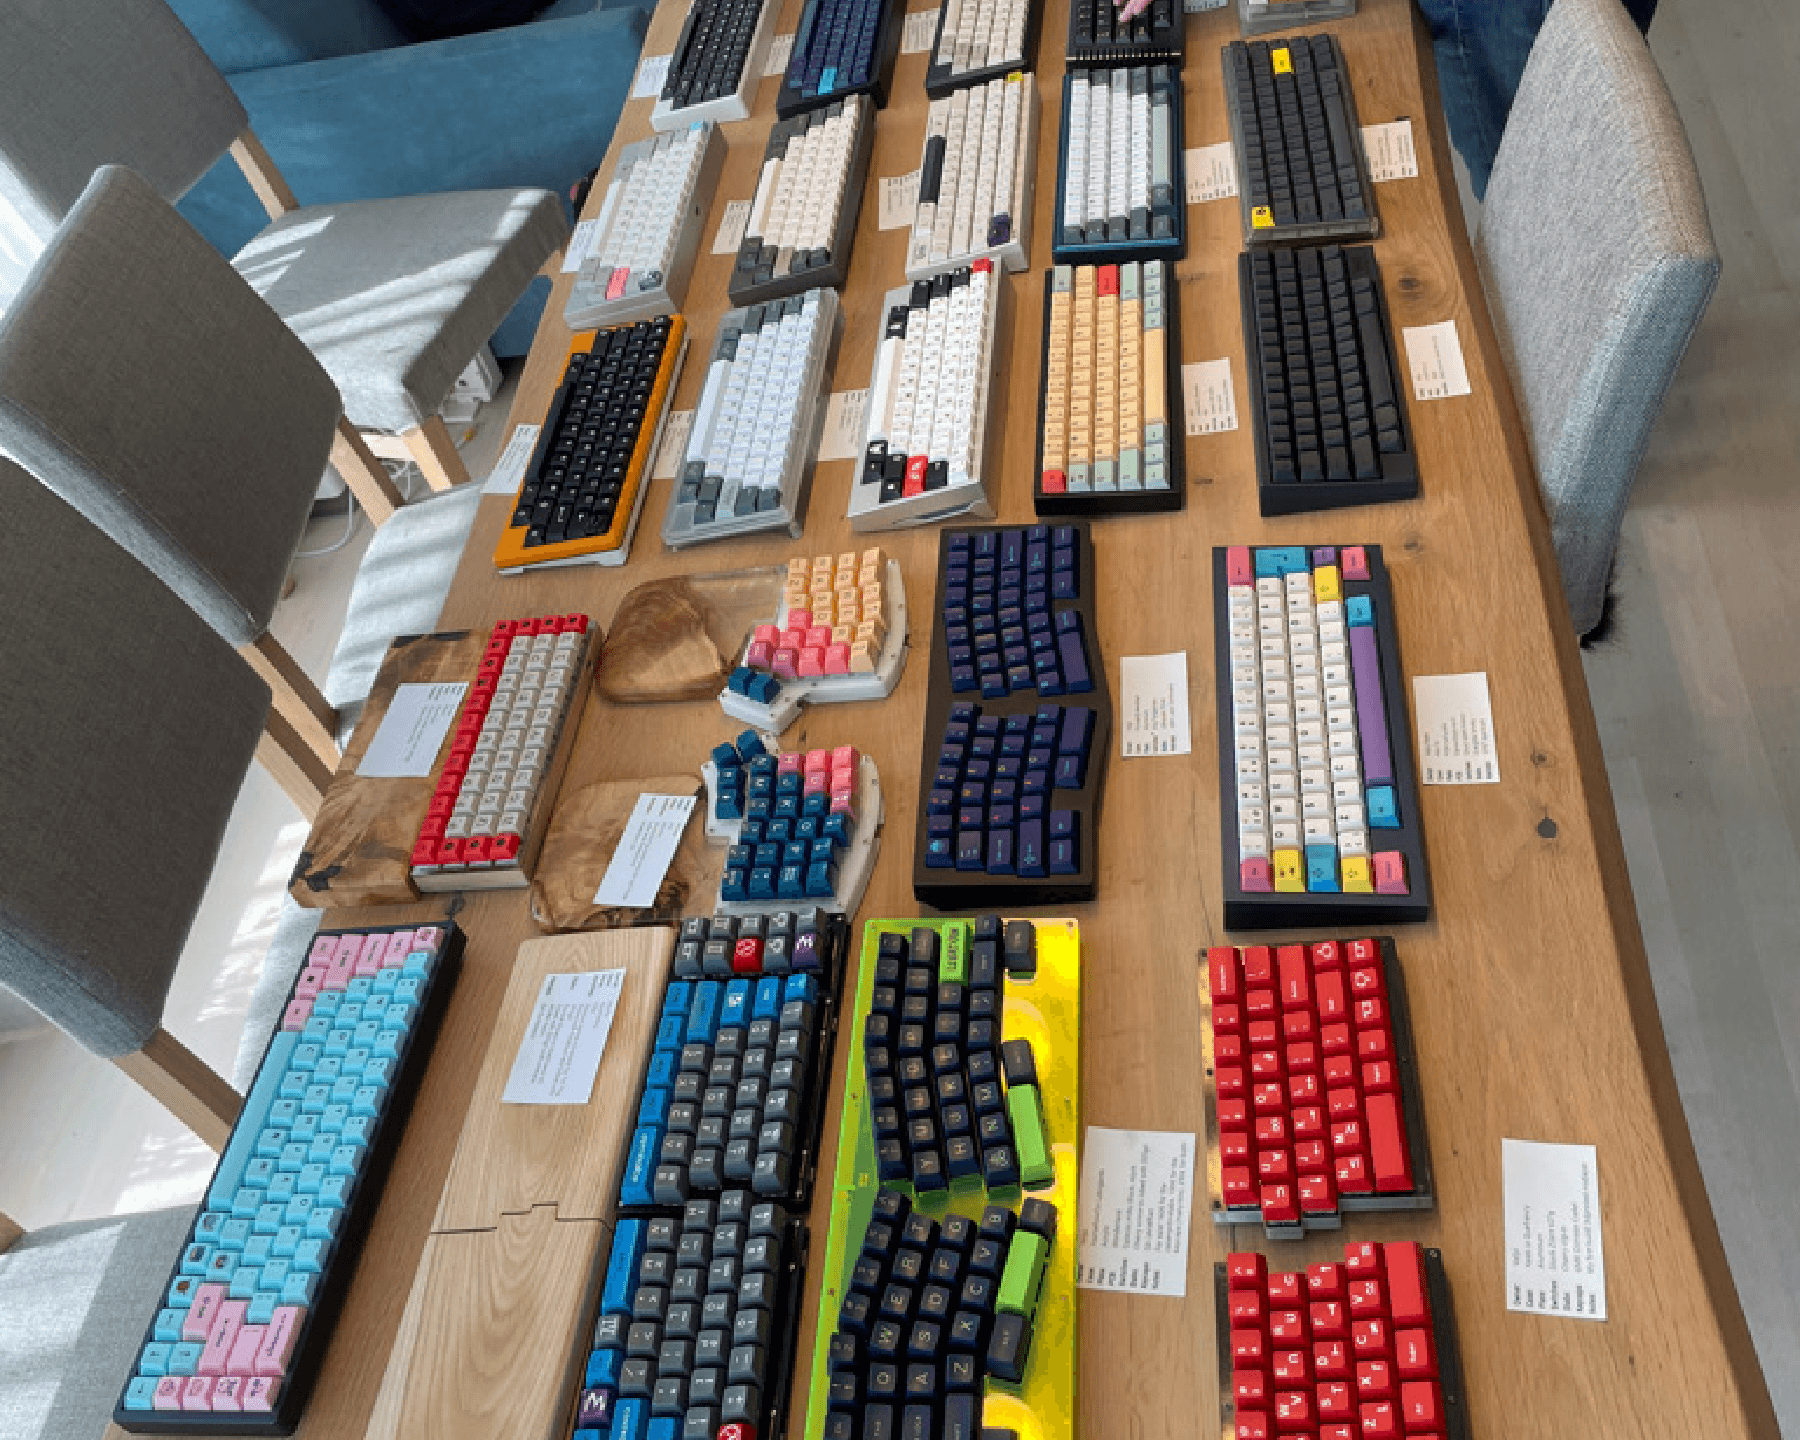 First meetup, overview of the keyboards from a different angle